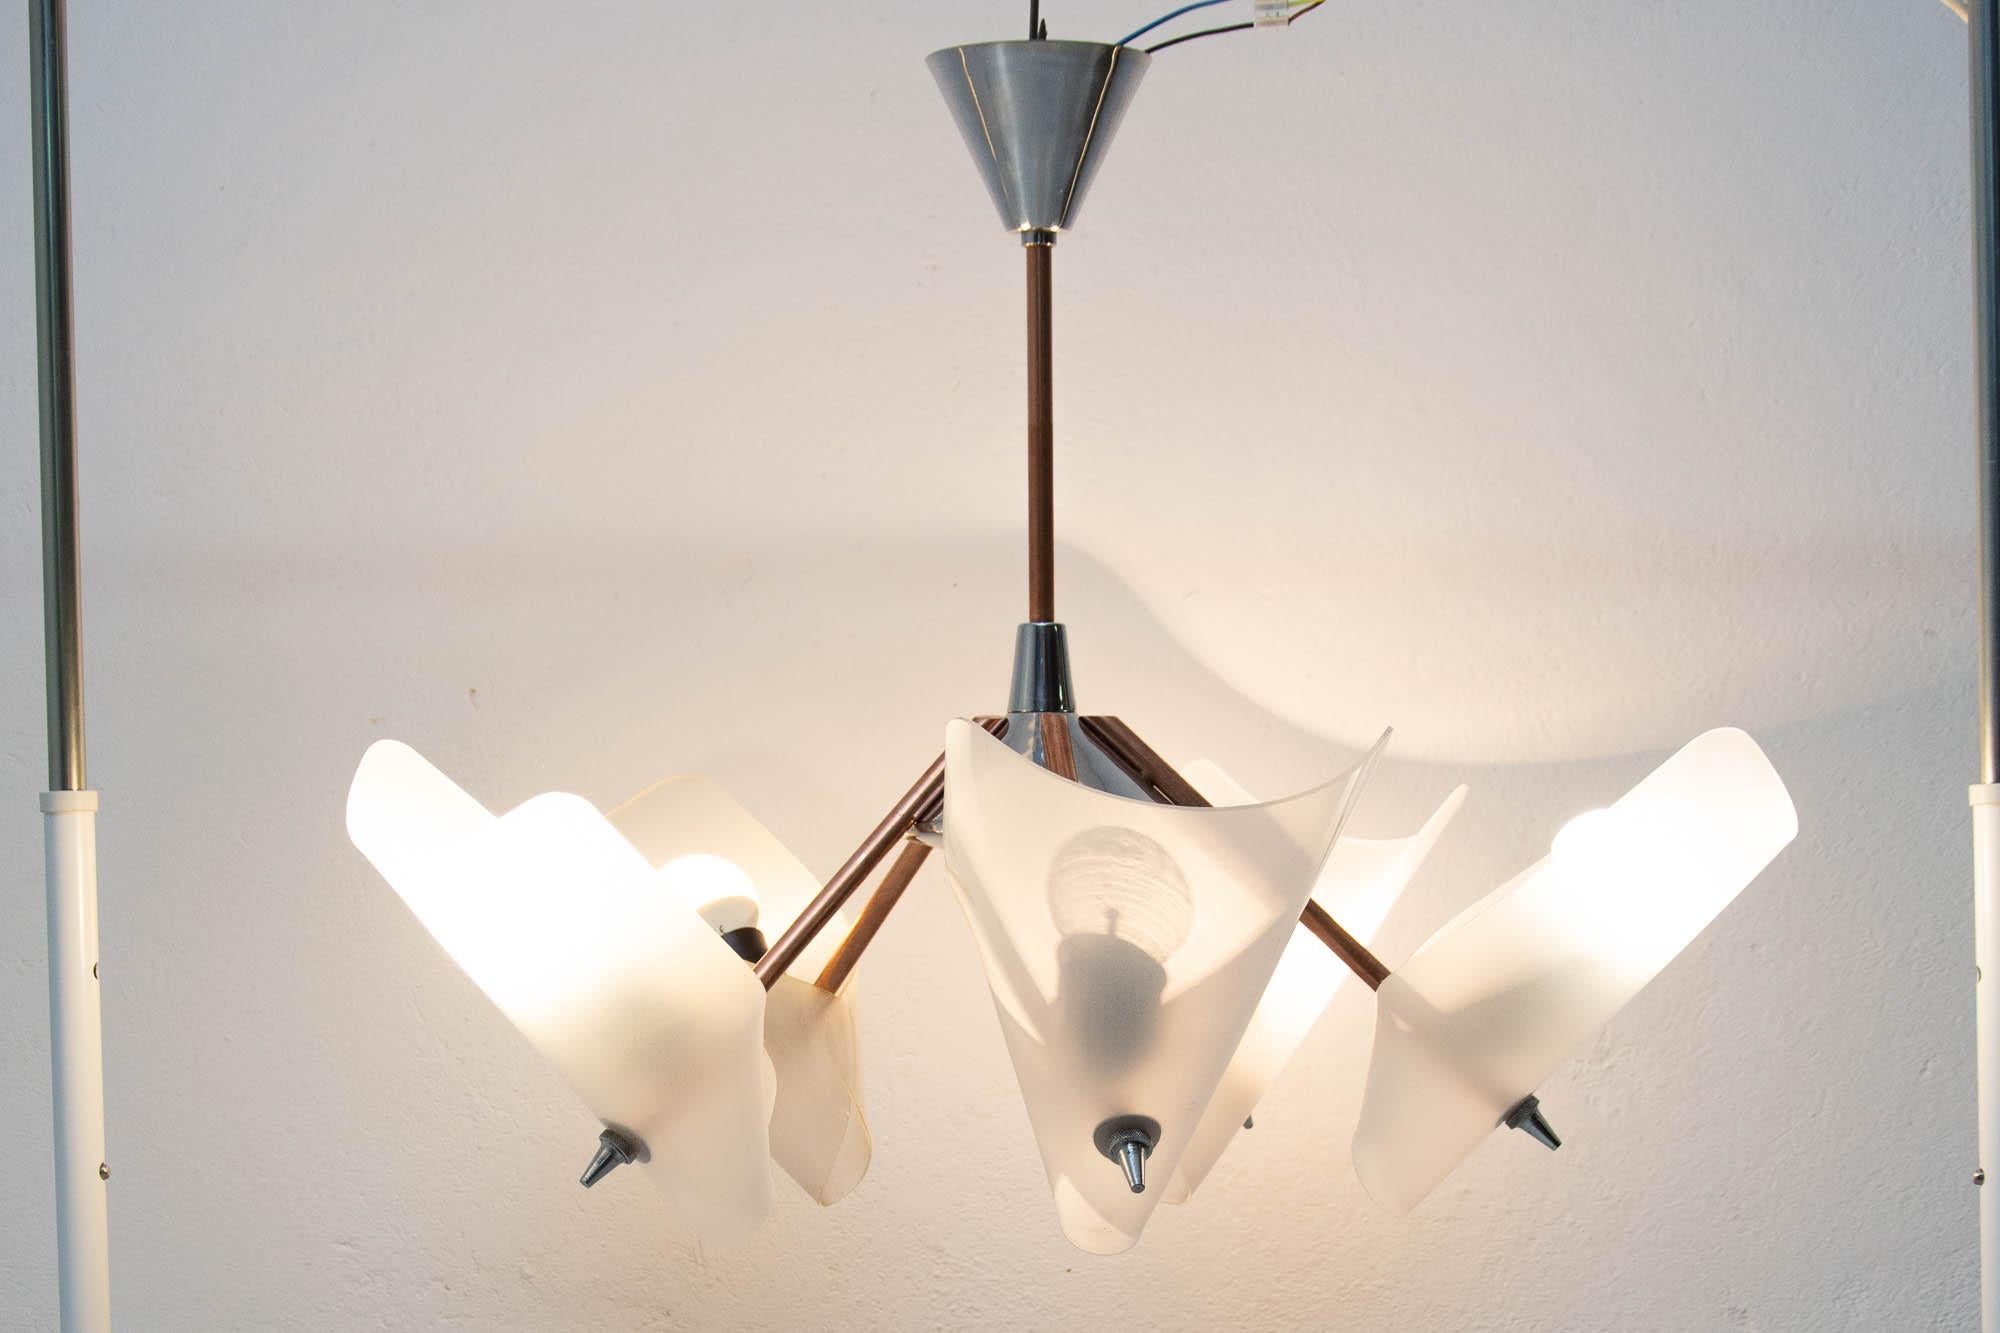 This nice pendant chandelier was made by Czechoslovak company Drukov in the 1950s. It features a brass and chrome structure with five arrows-shaped rods on which 5 plastic conic shades are mounted. The chandelier was completely cleaned and newly